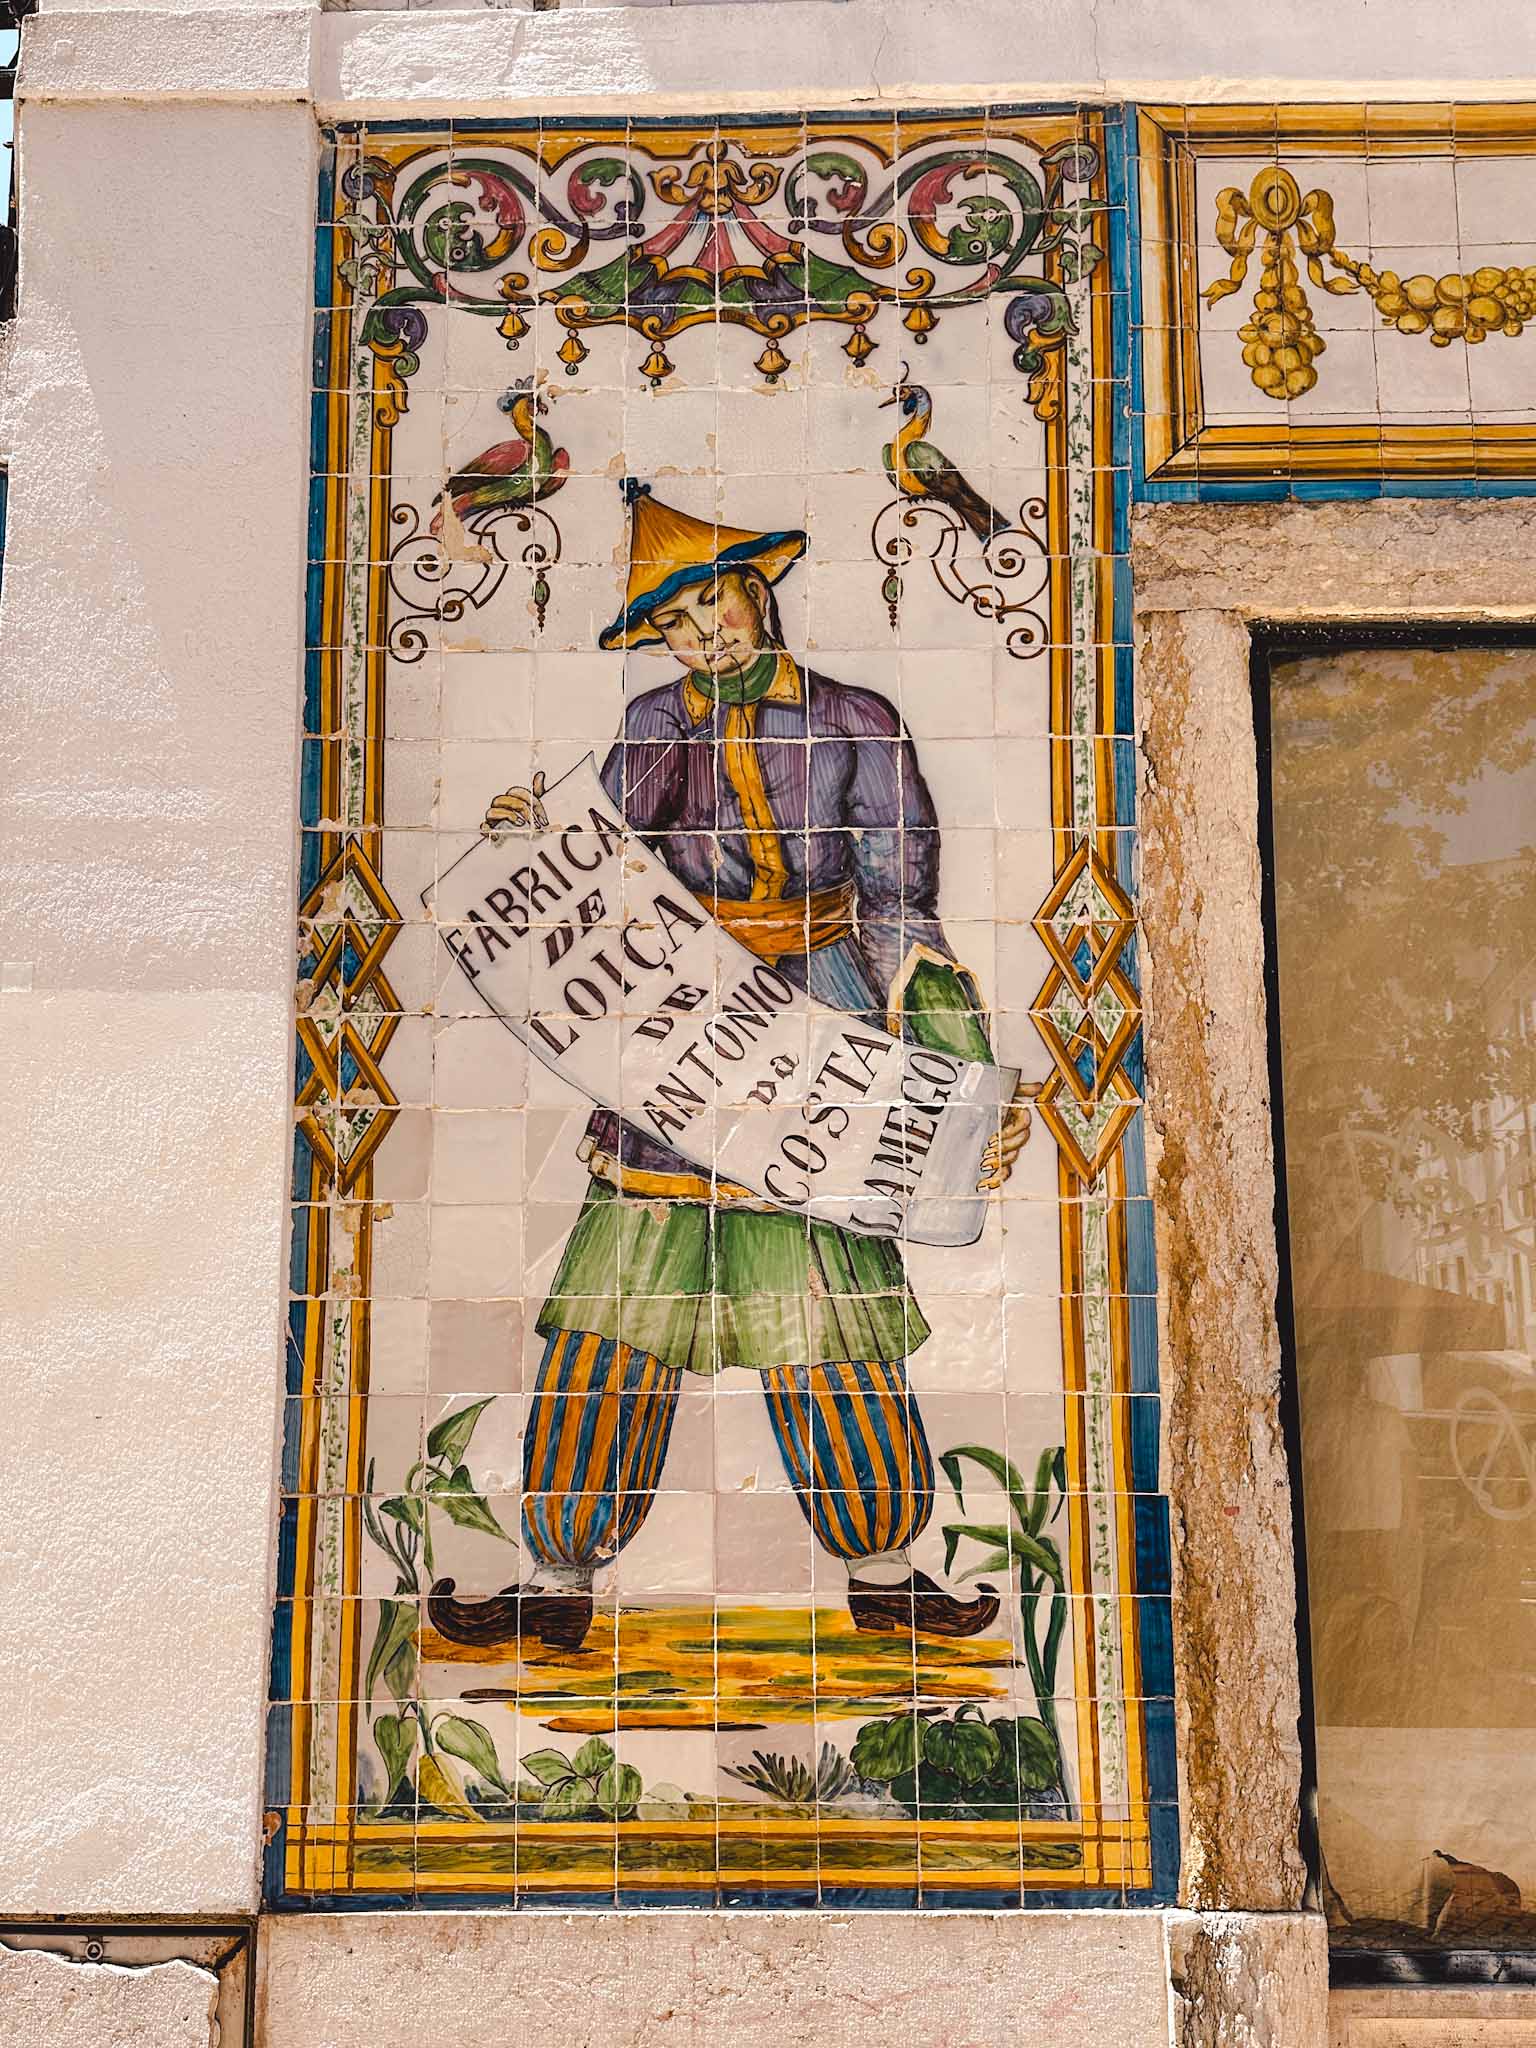 Hidden gems in Lisbon - the unique tile covered house with detailed illustrations at Largo do Intendente